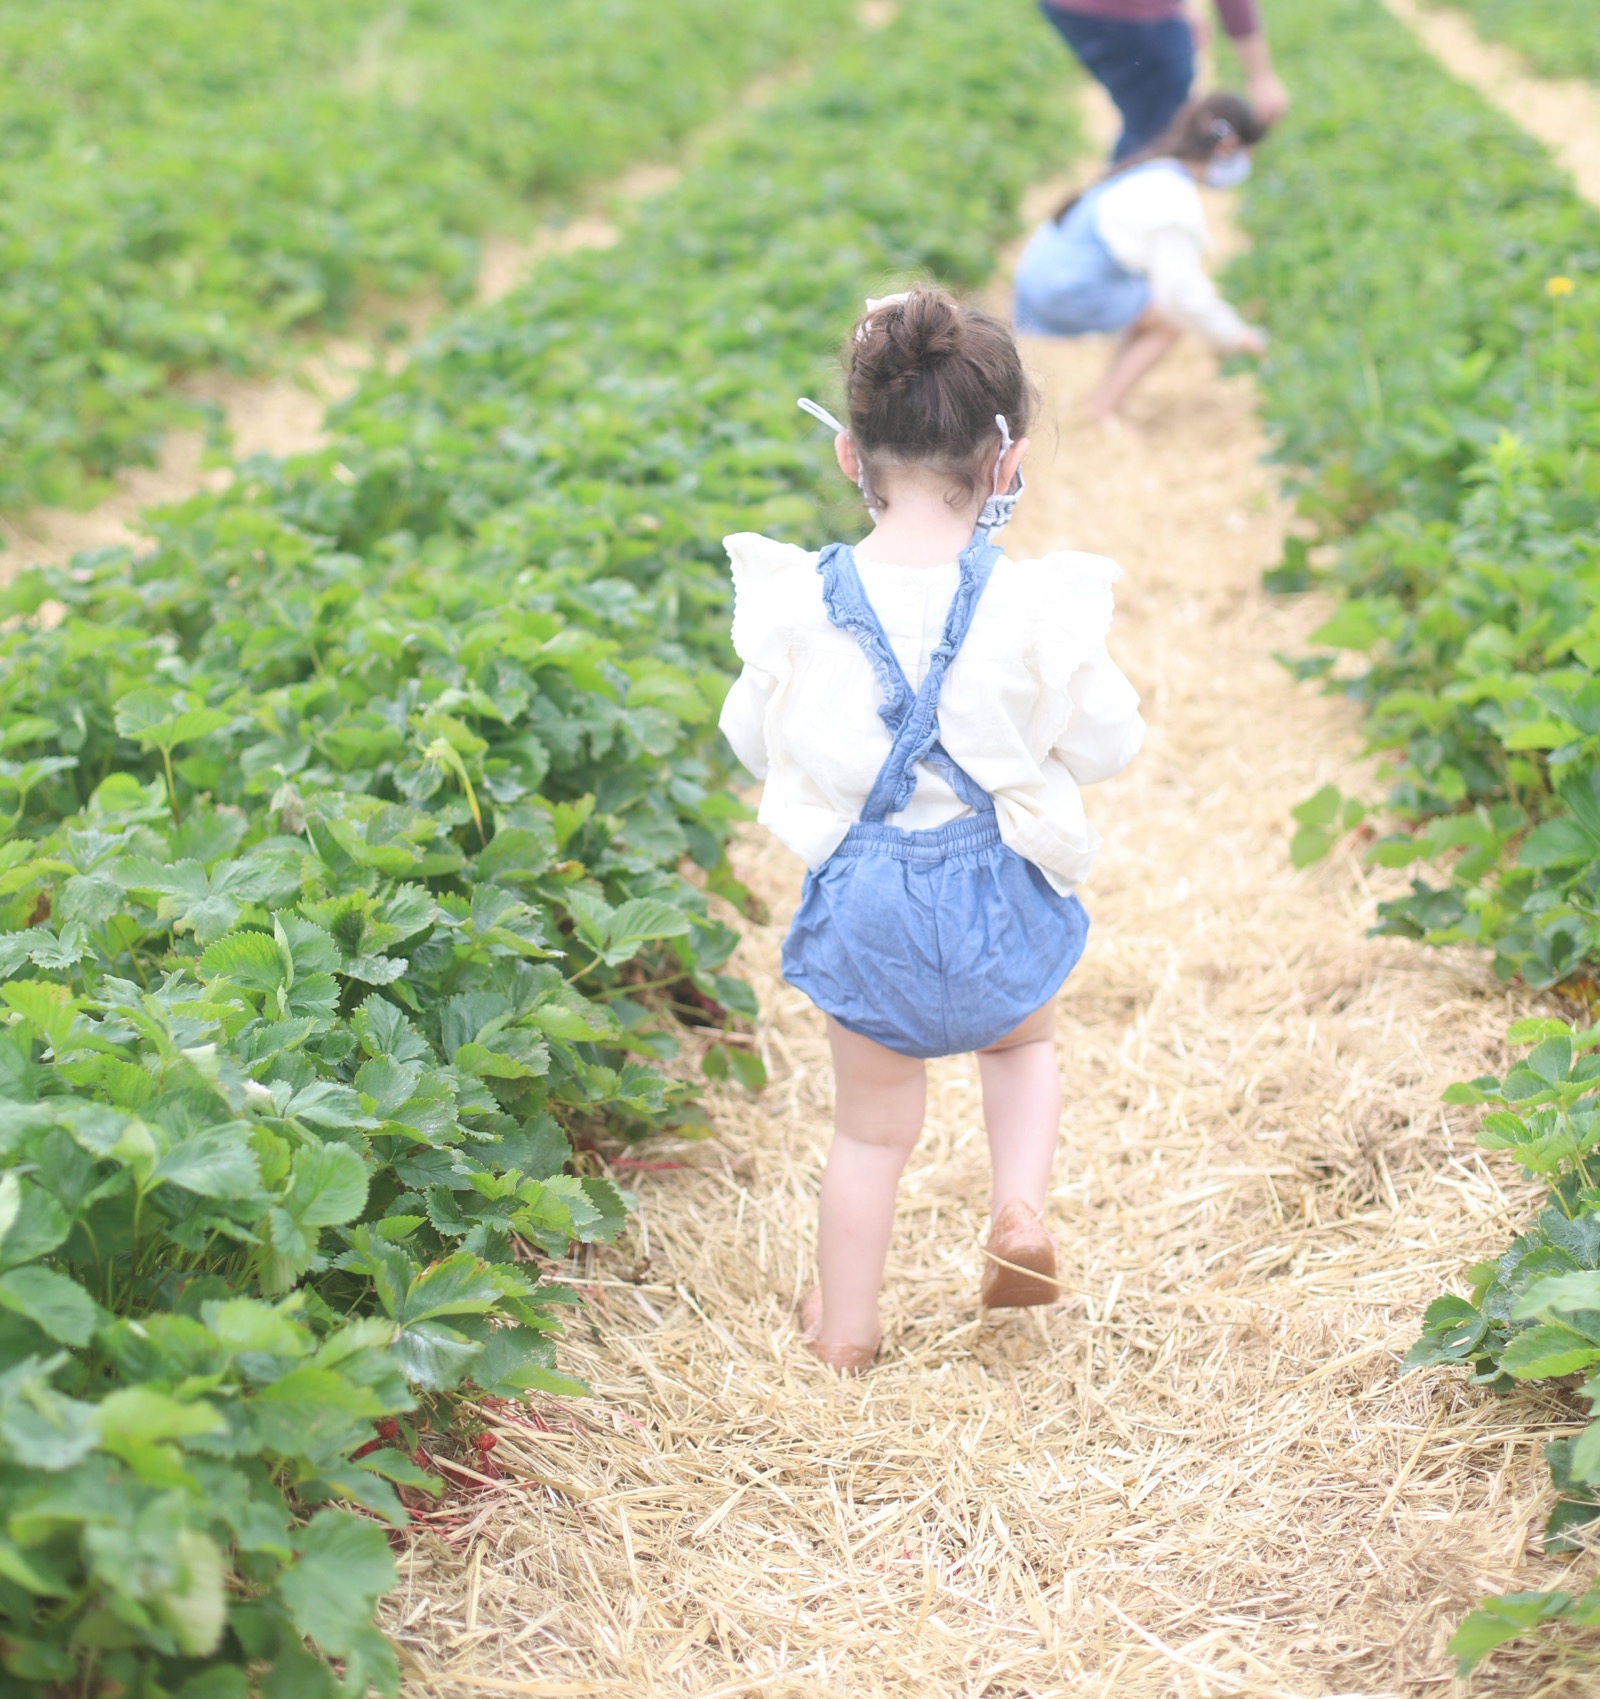 Looking for somewhere family-friendly to do a little berry picking around the Boston area this summer? We’ve founded the sweetest spot to pick blueberries, strawberries, and even cherries! | @glitterinclexi | GLITTERINC.COM